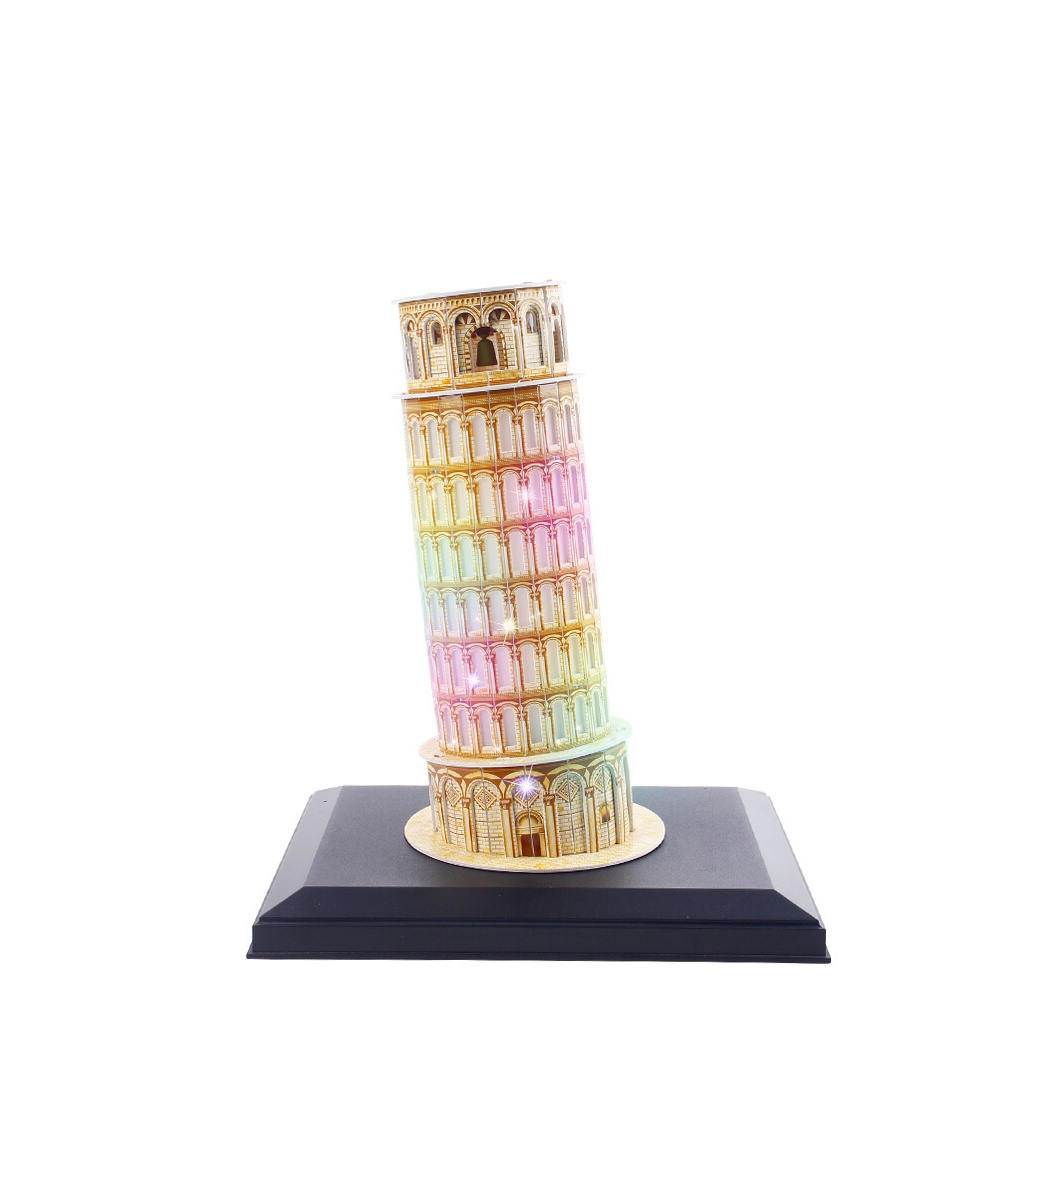 Detailed LED Lighted Architectural Model Leaning Tower of Pisa 